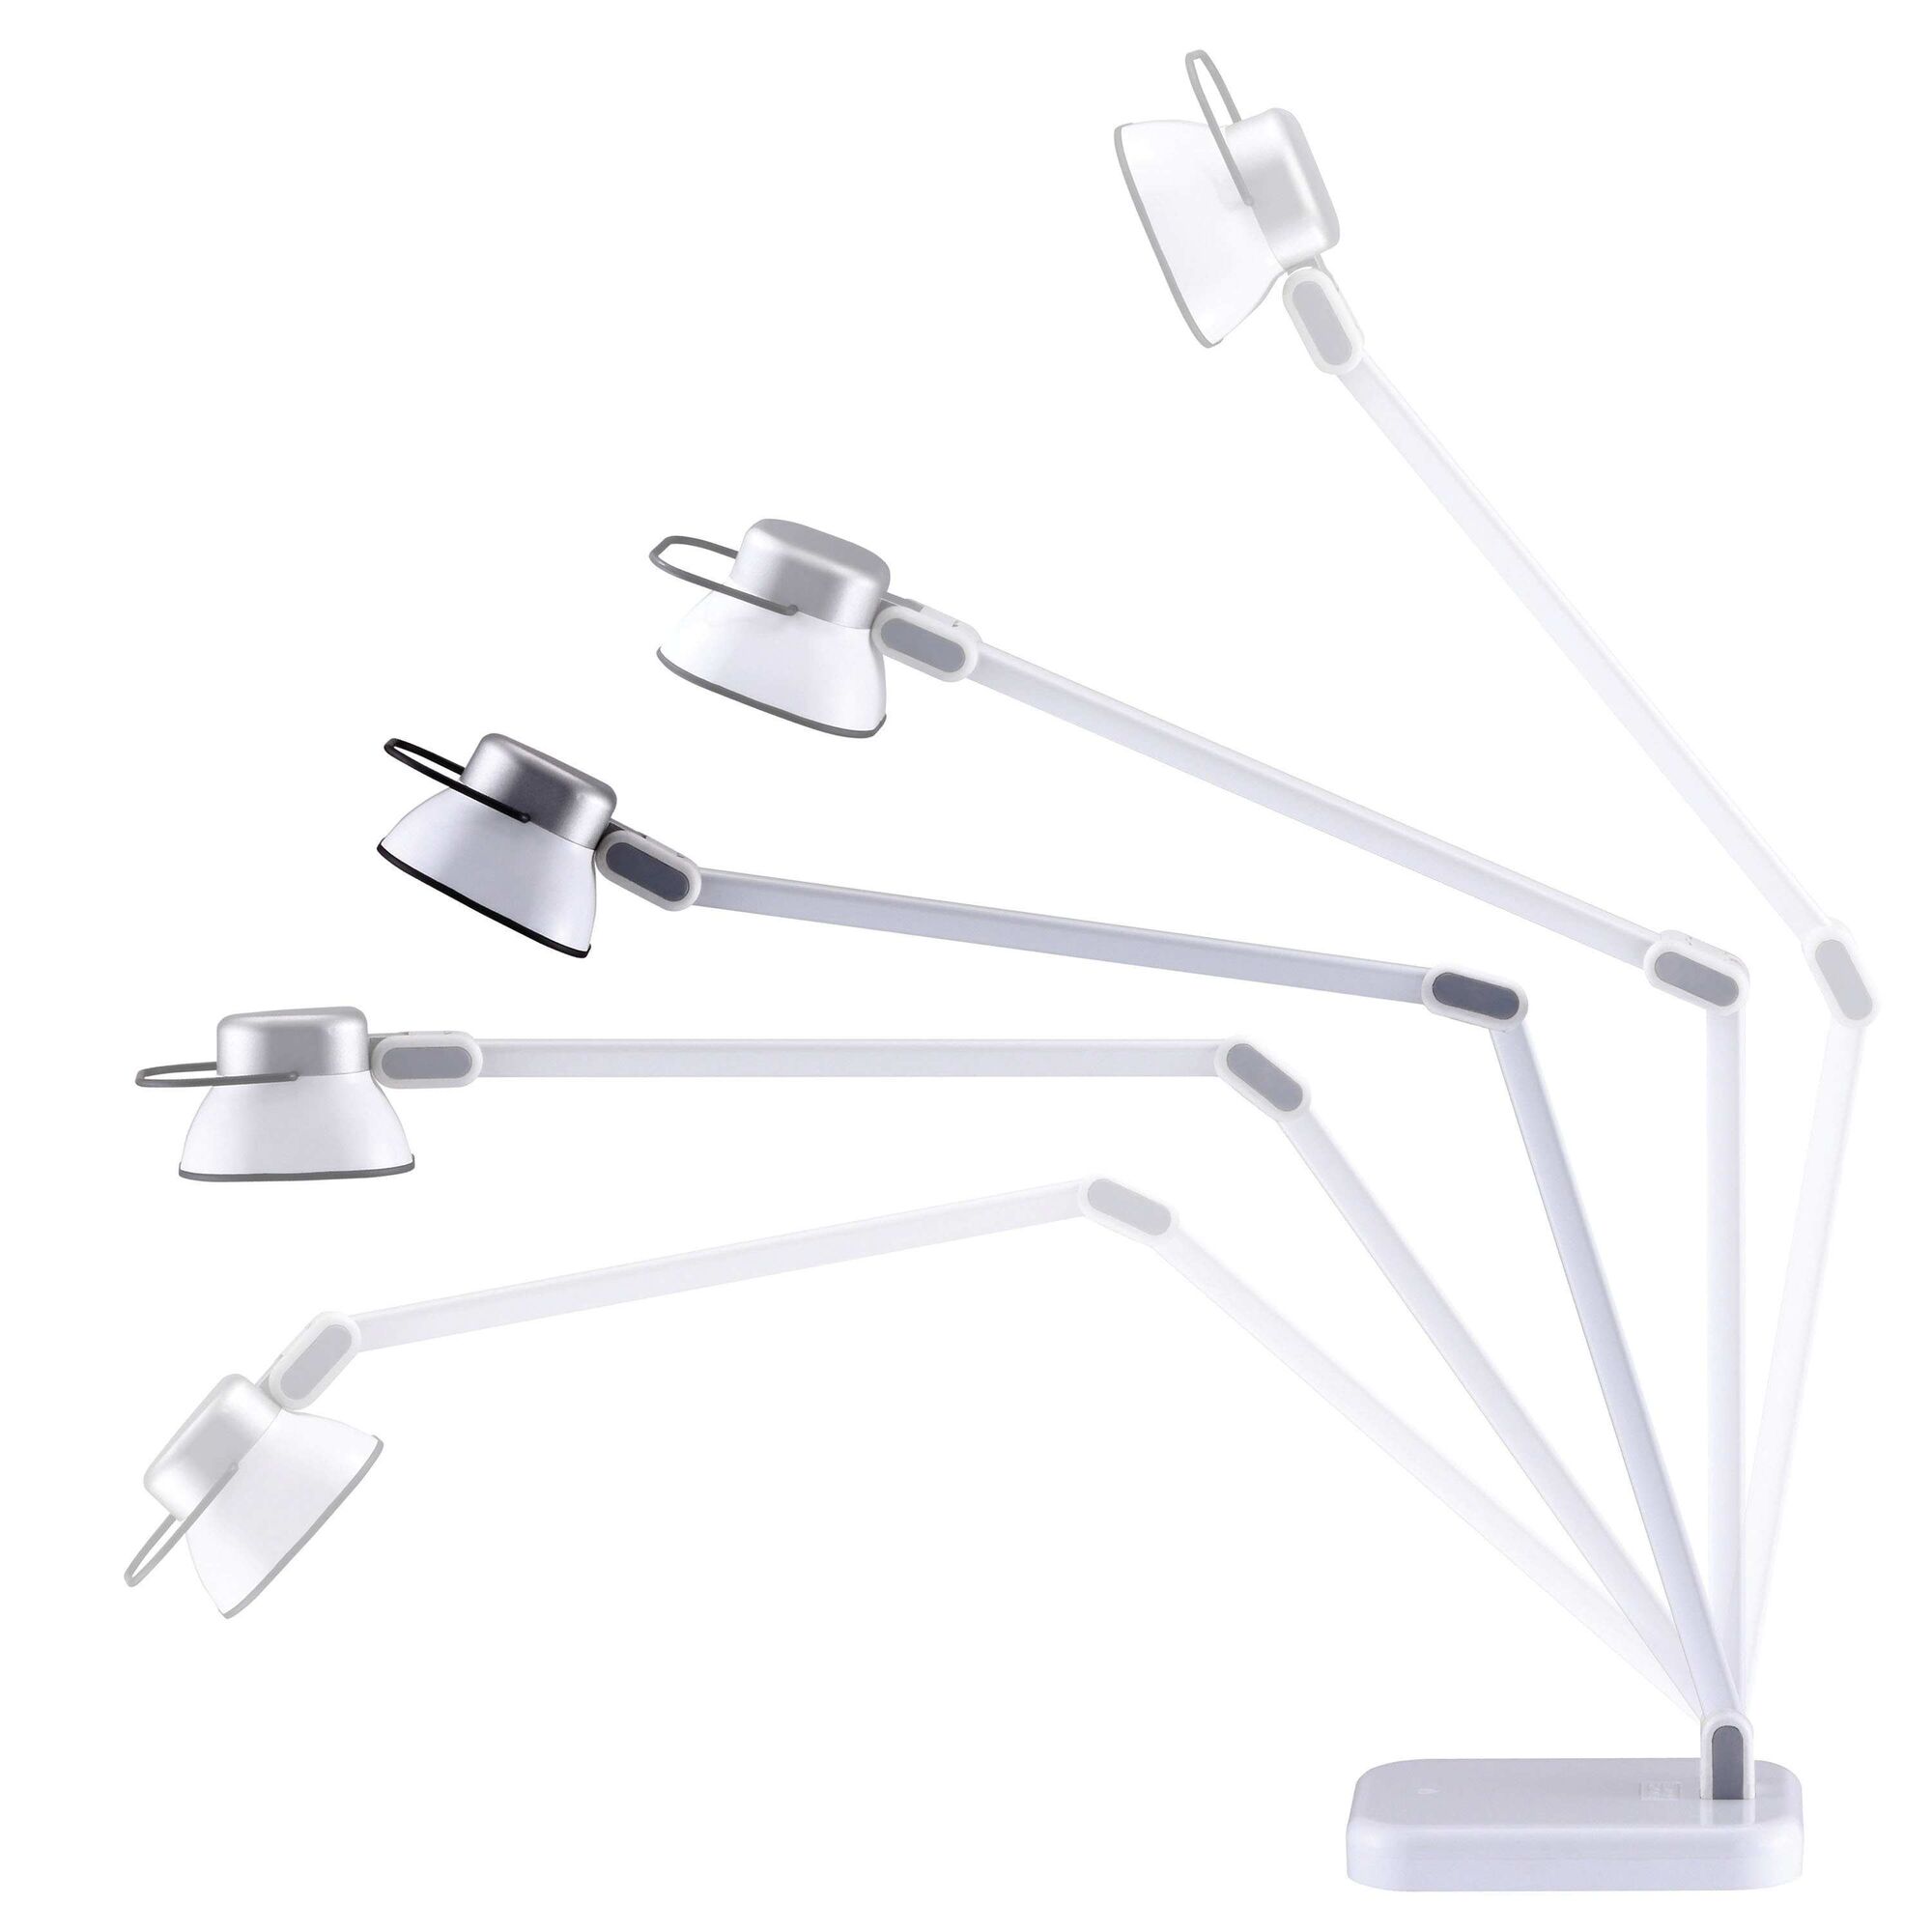 Adjustable lamp head and lamp arm feature of Elate Dual Arm LED Desk Lamp.